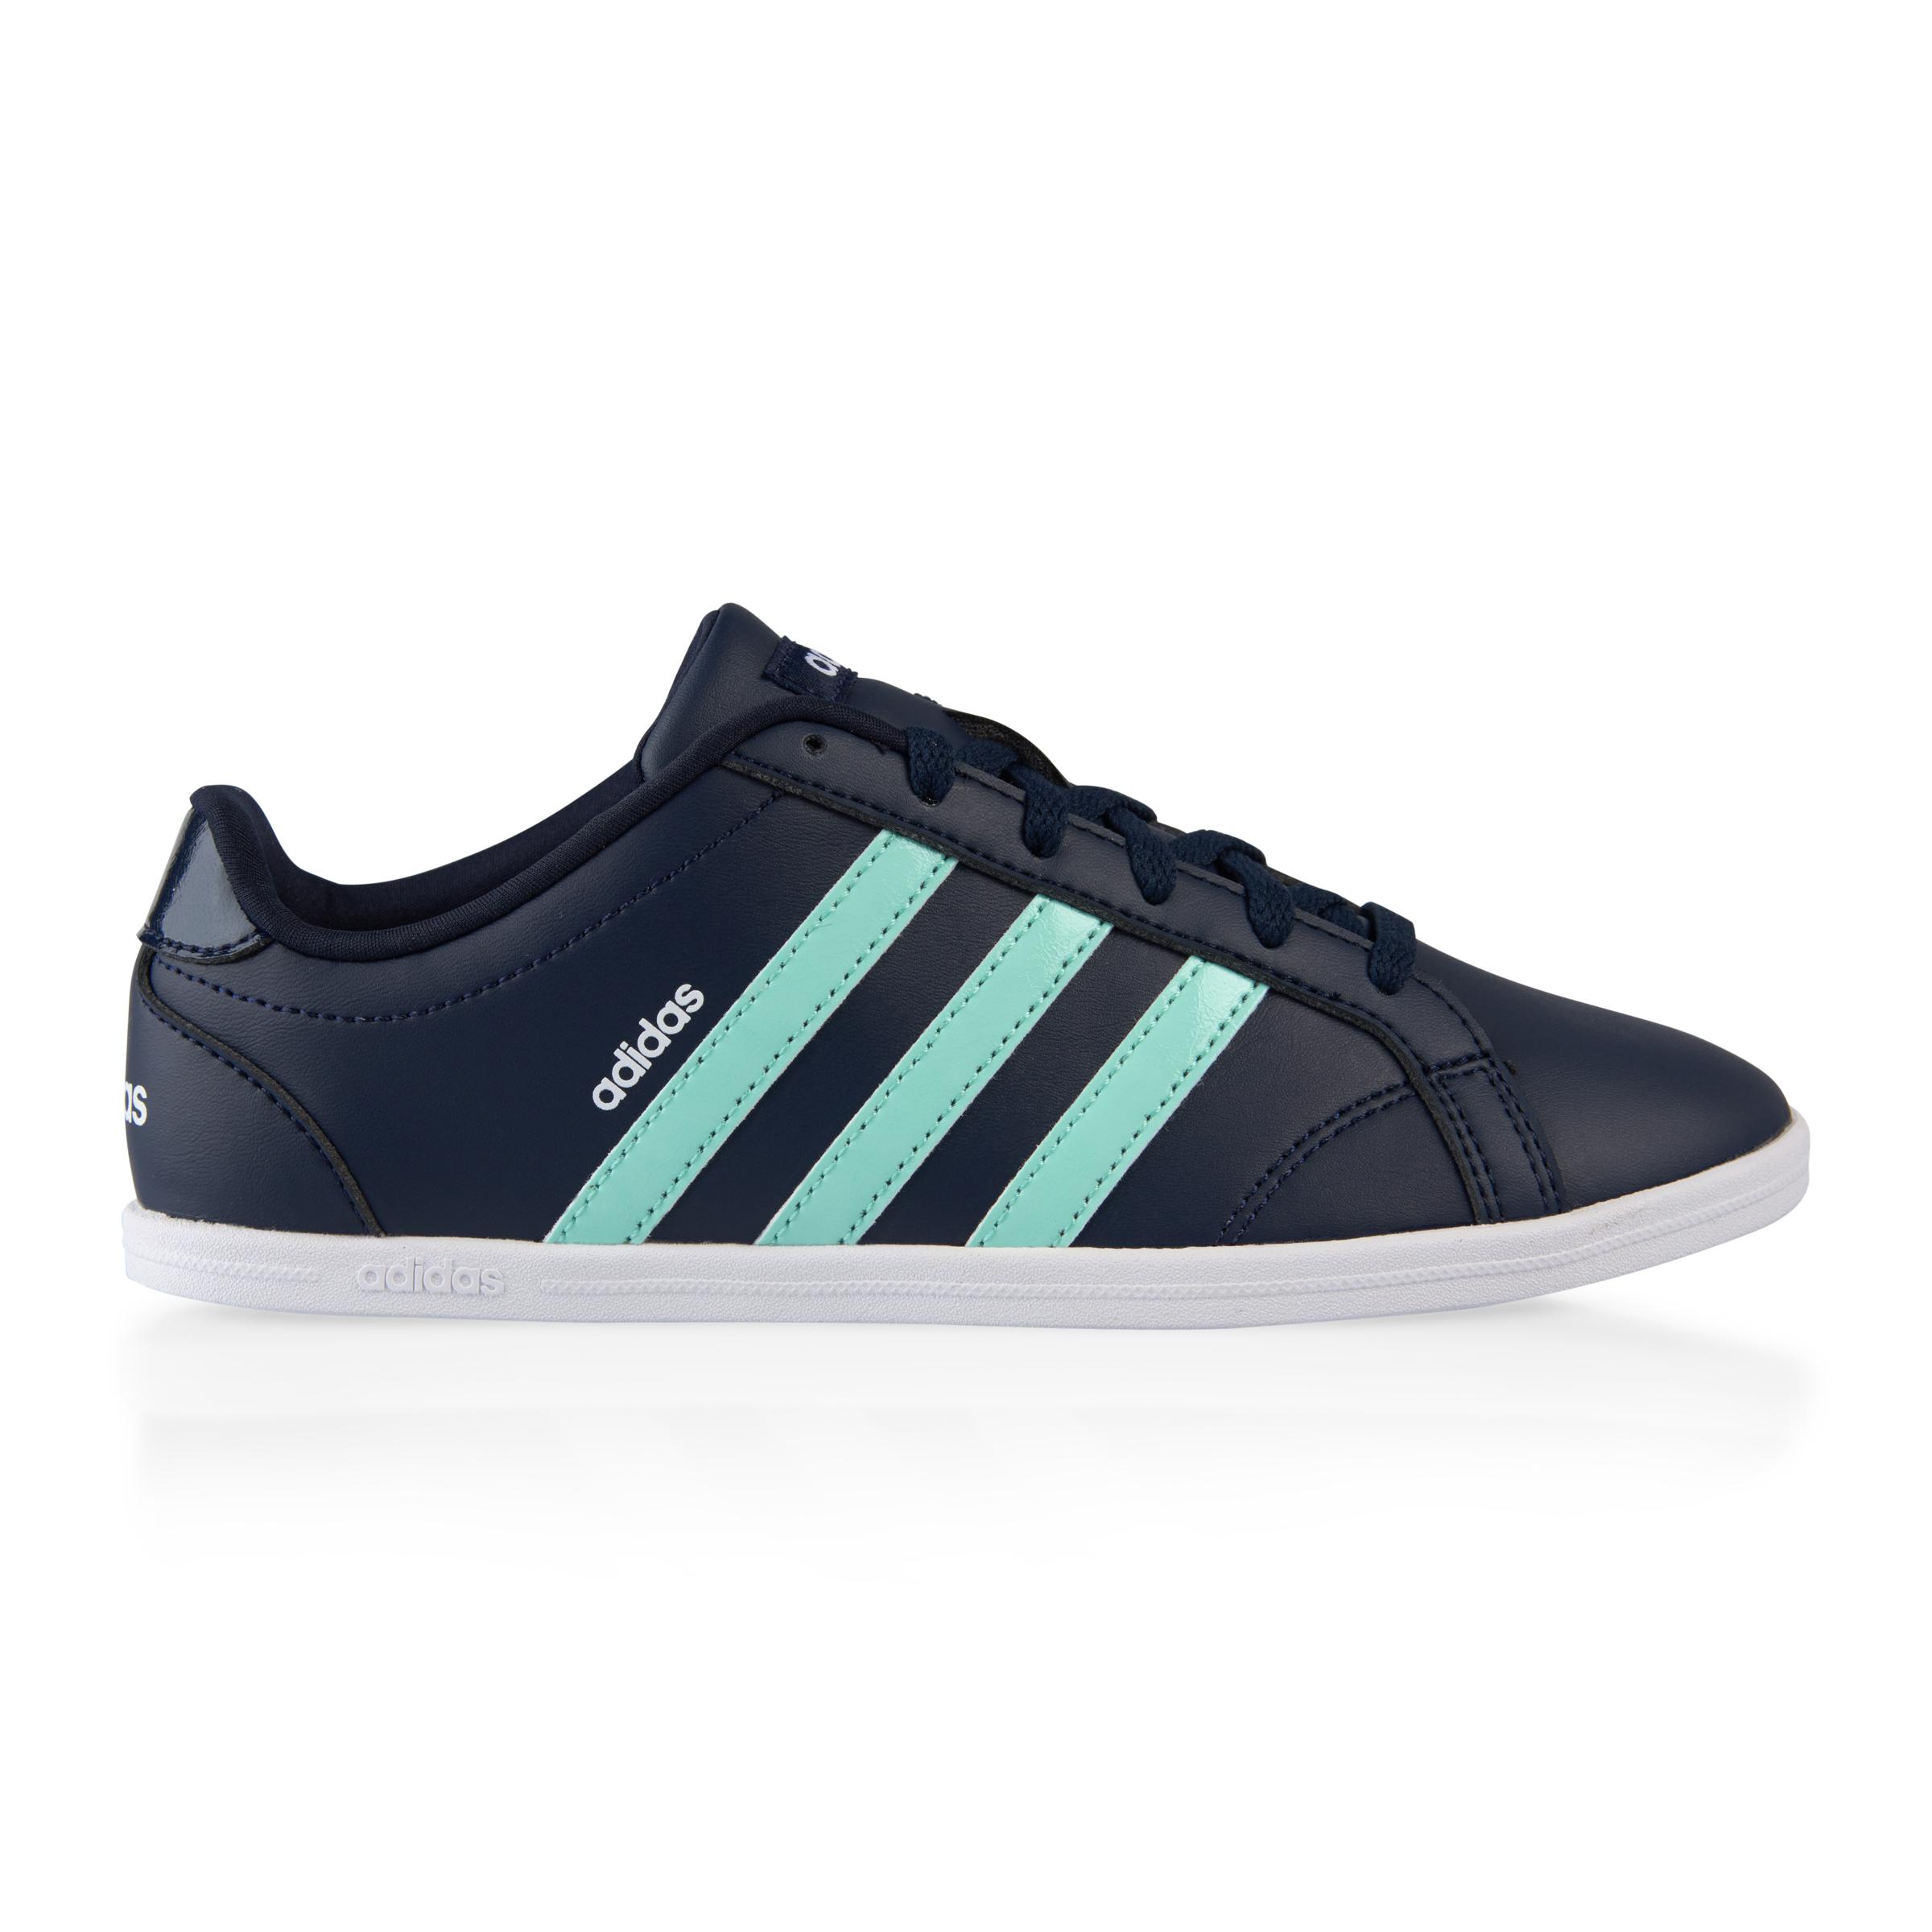 adidas sneakers at truworths